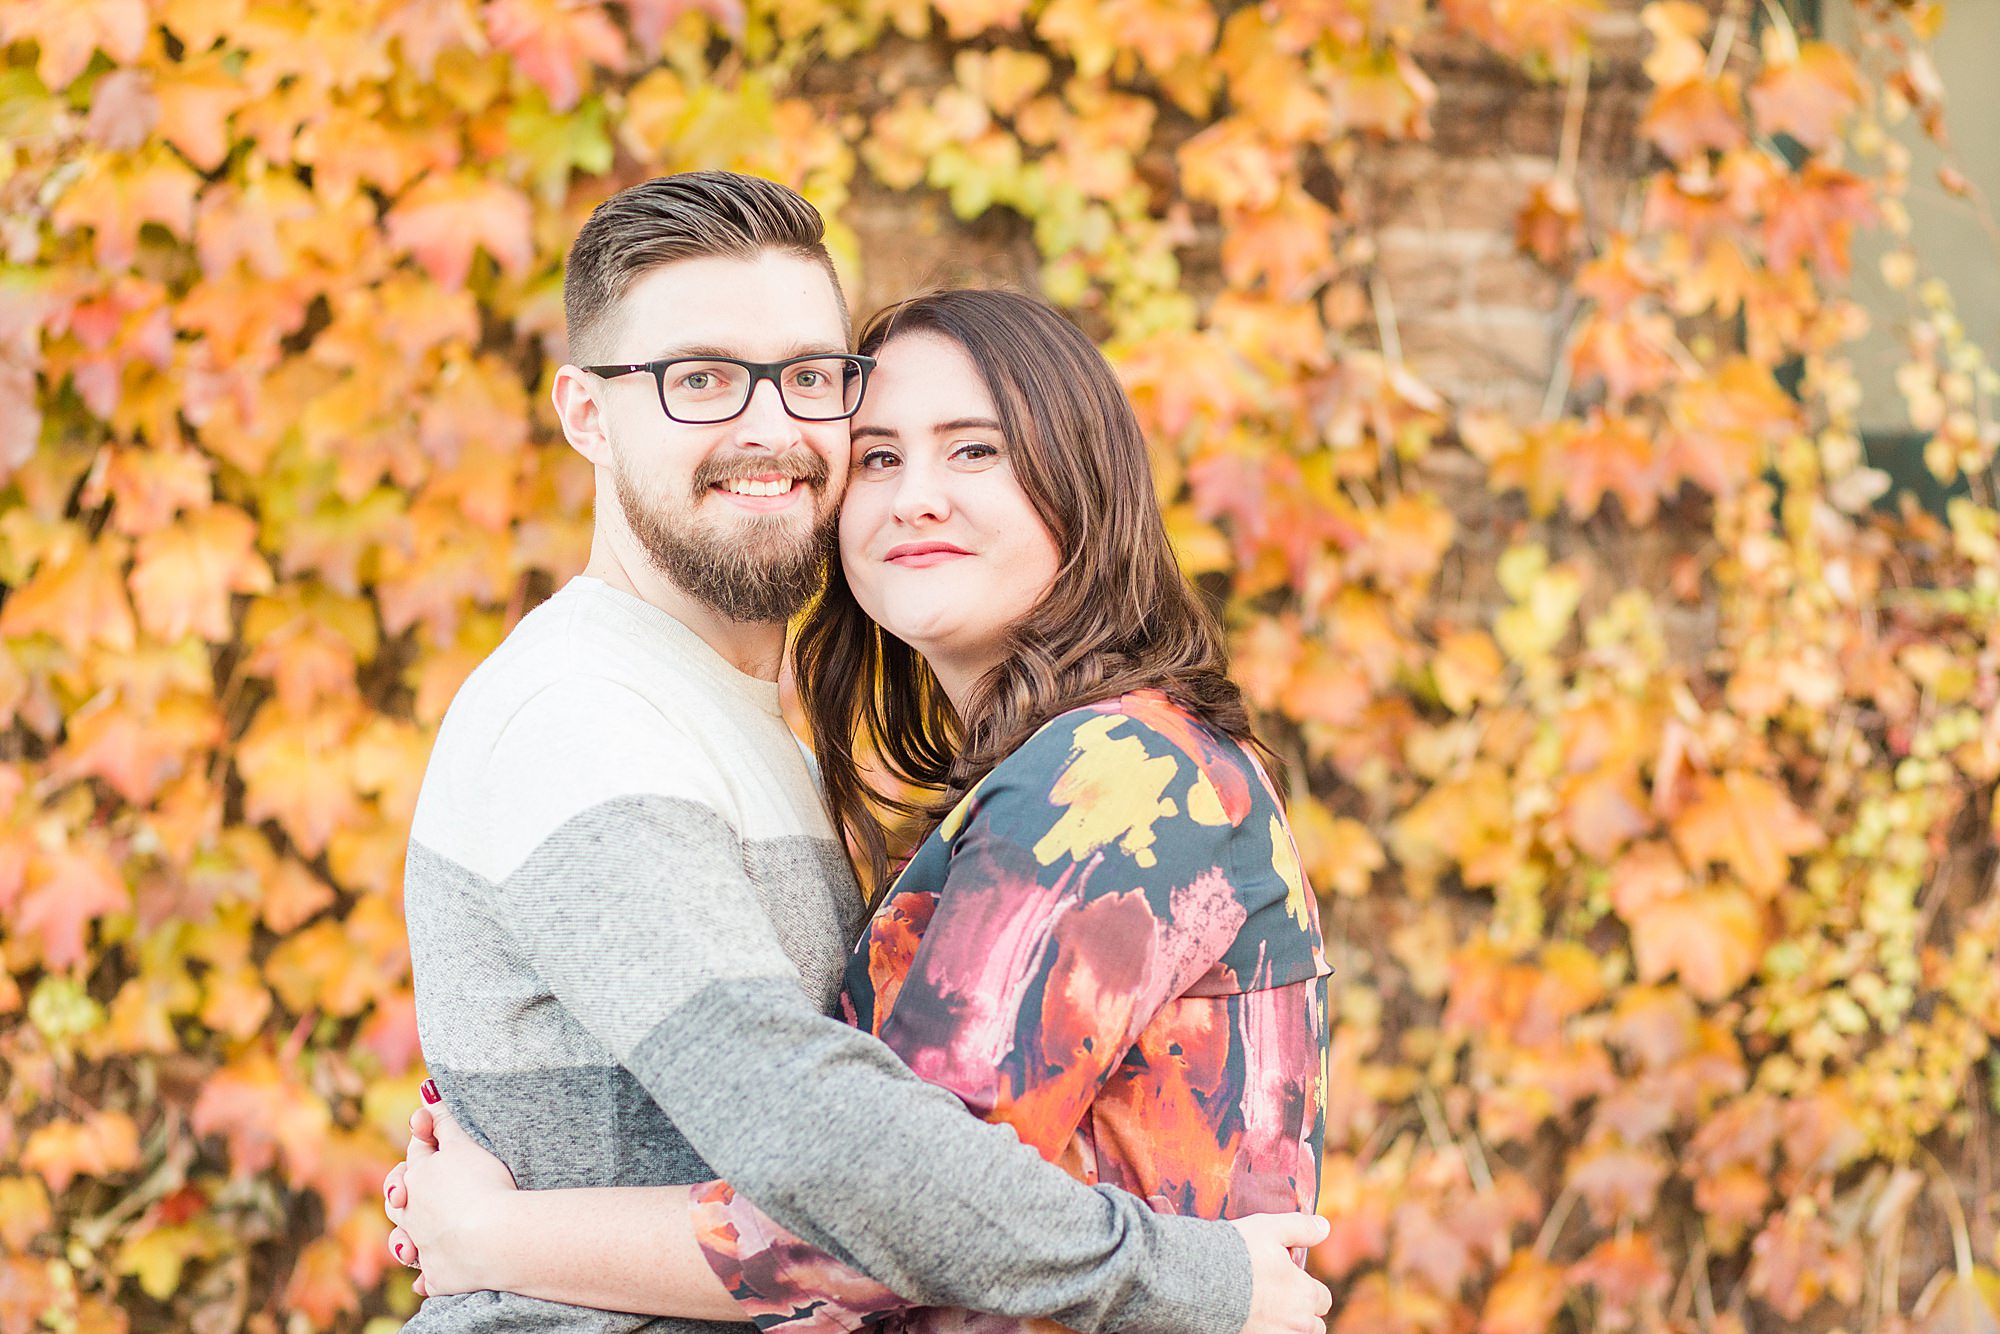 Orange fall leaves behind a couple pop during this colorful fall engagement session